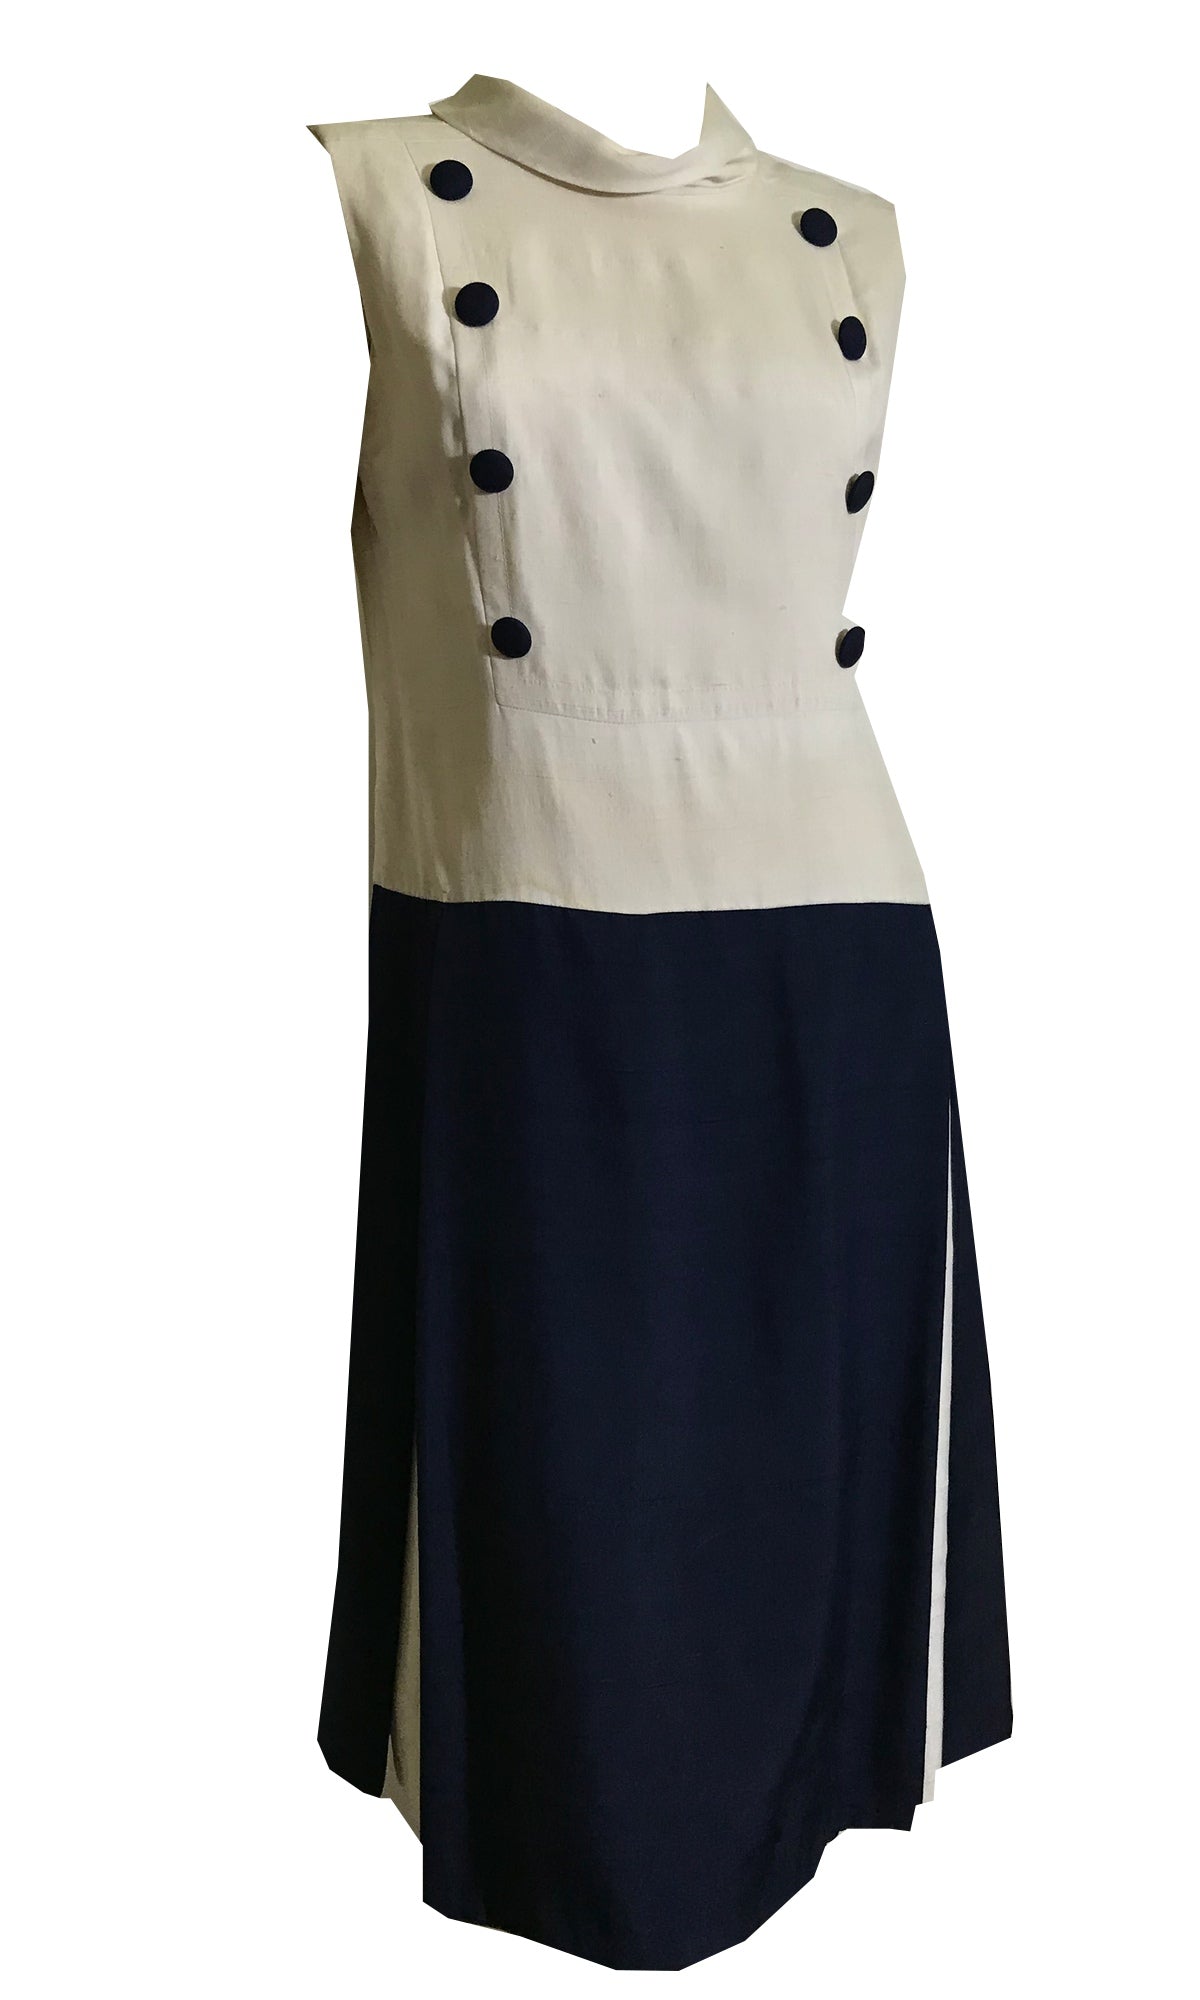 Military Inspired Navy and Soft White Slubbed Silk Dropped Waist Dress circa 1960s